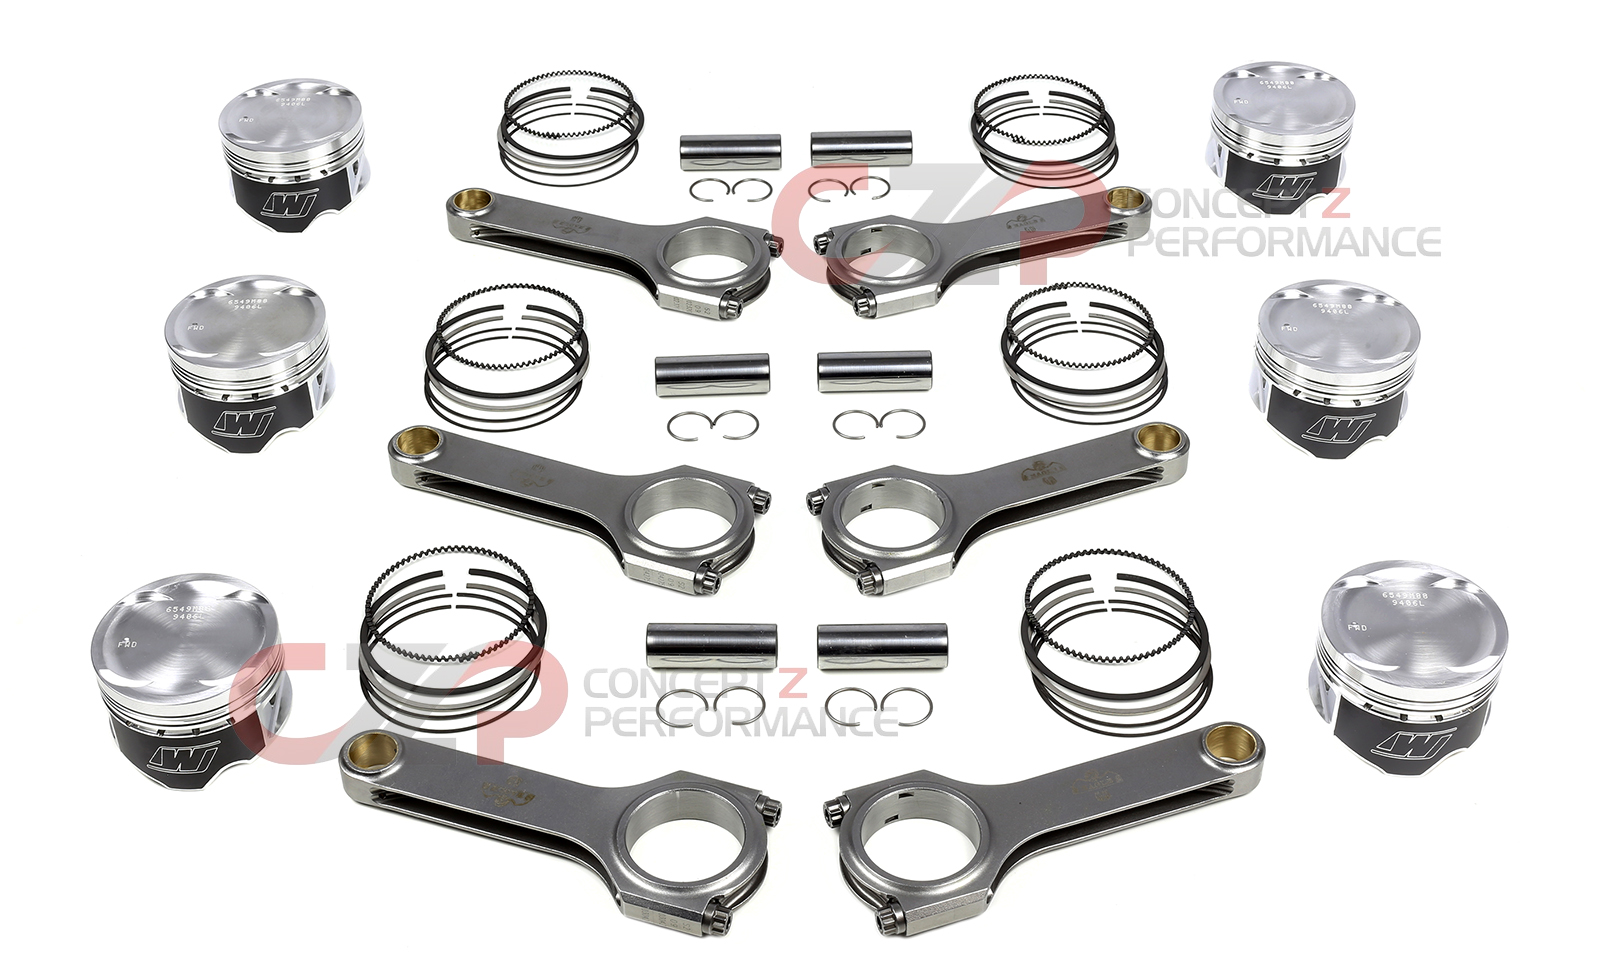 Nissan vg30et performance connecting rods and pistons #4